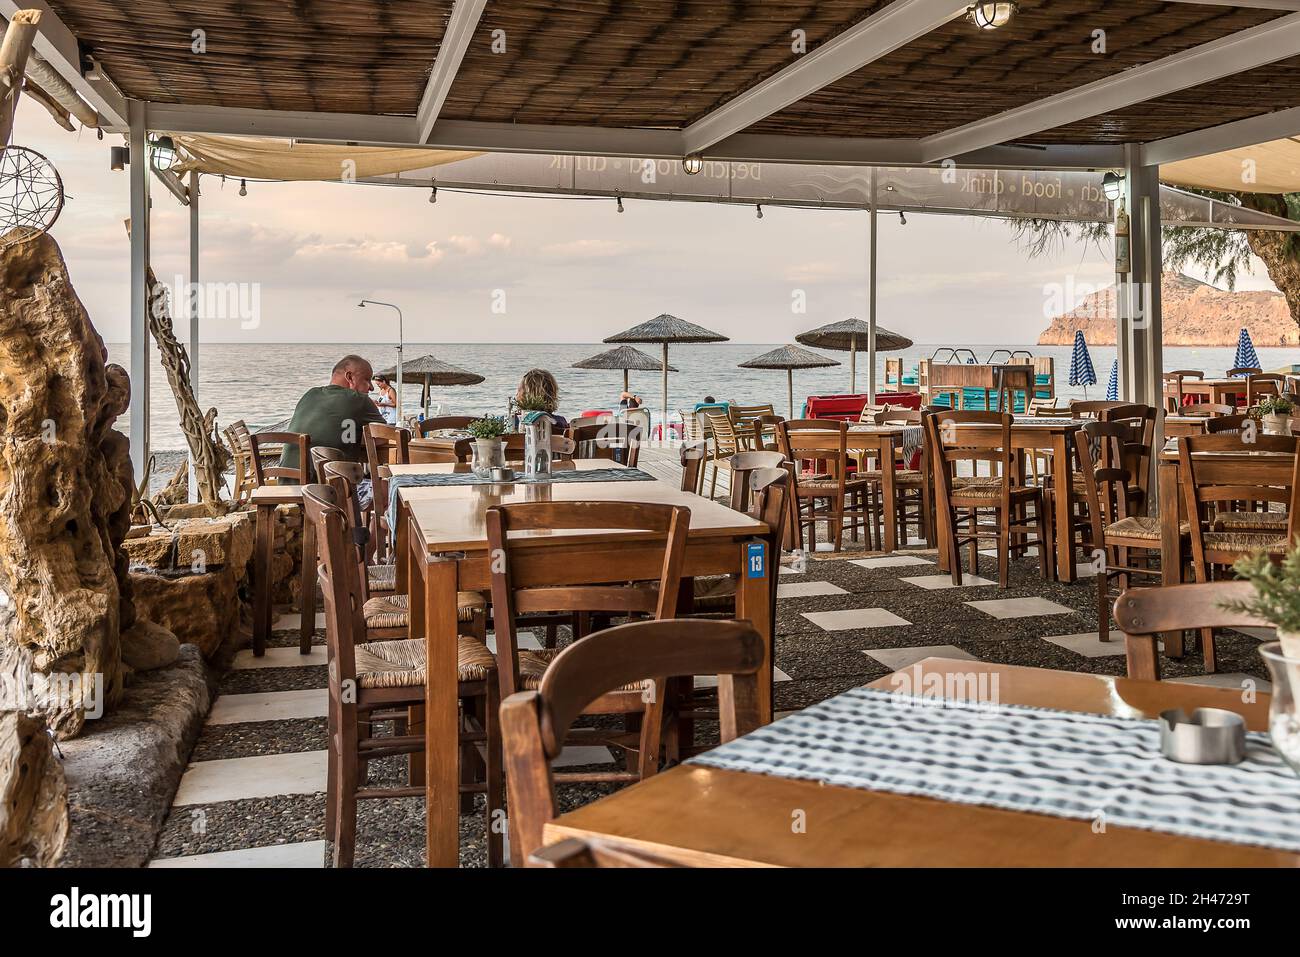 Man and woman sitting at a table in a greek restaurant overlooking the sea, Platanias, Crete, Greece, Oktober 7, 2021 Stock Photo